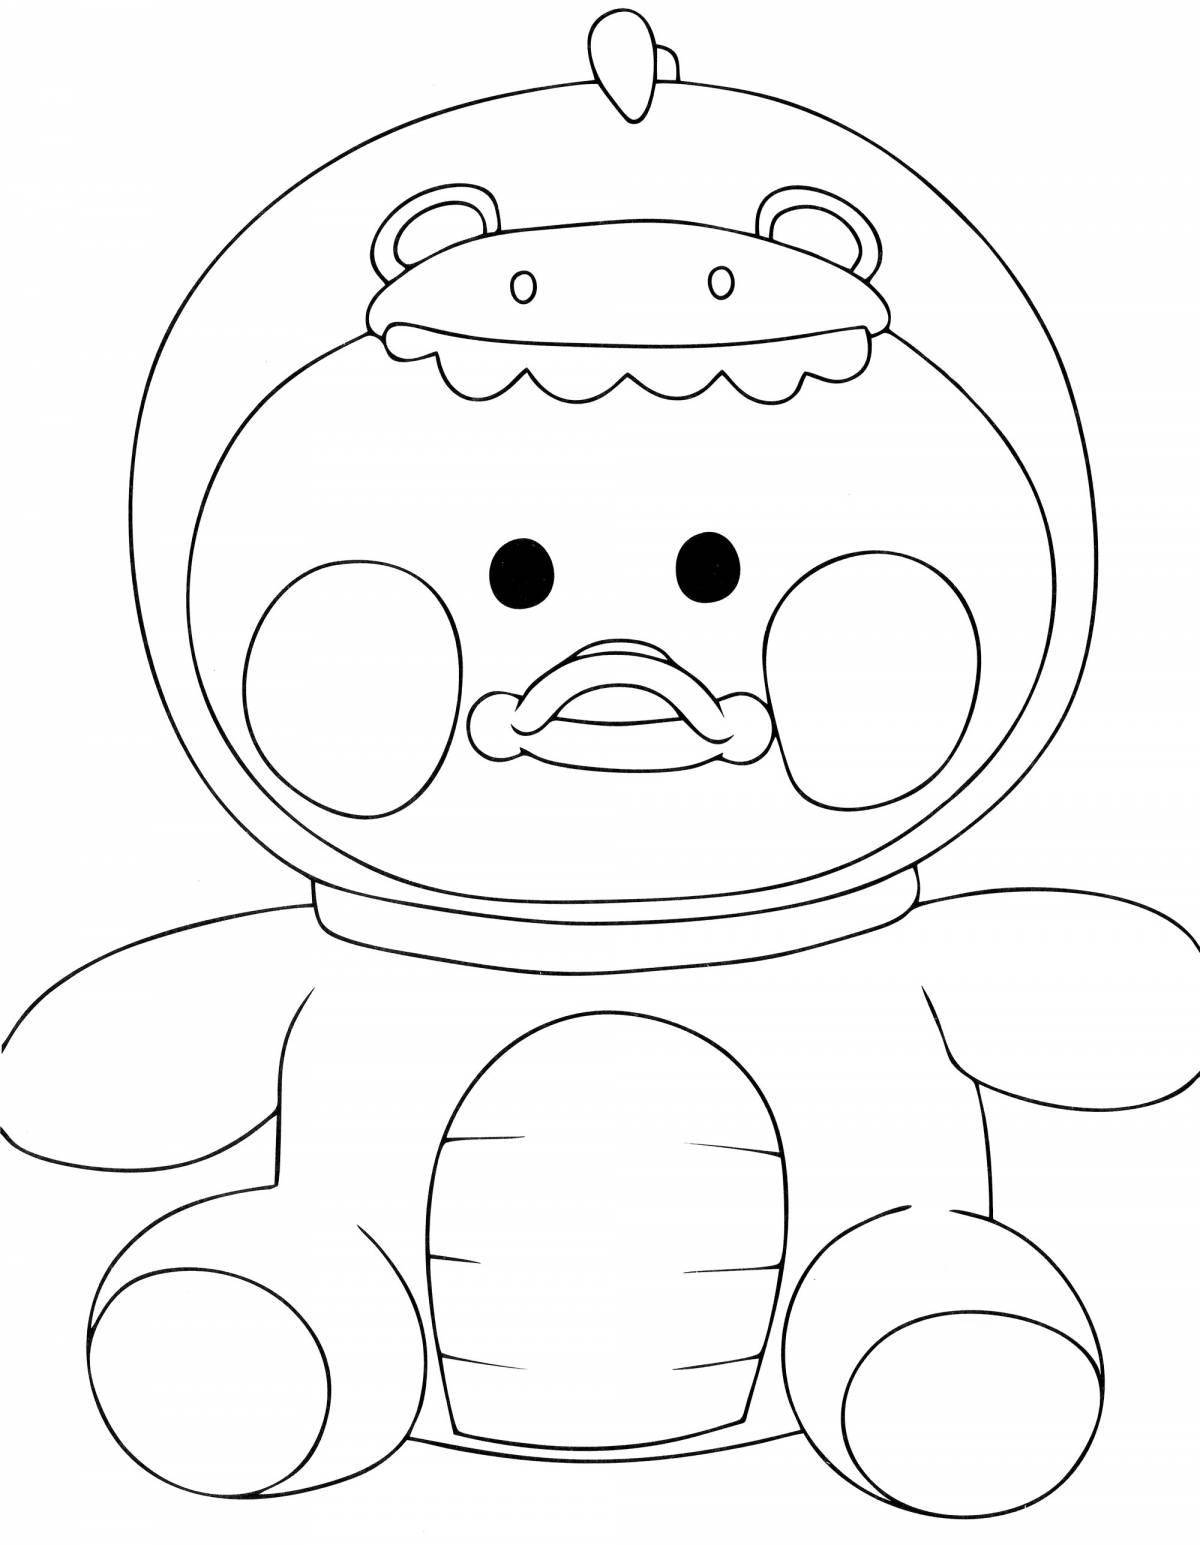 Lovely lalafanfan big duck coloring page